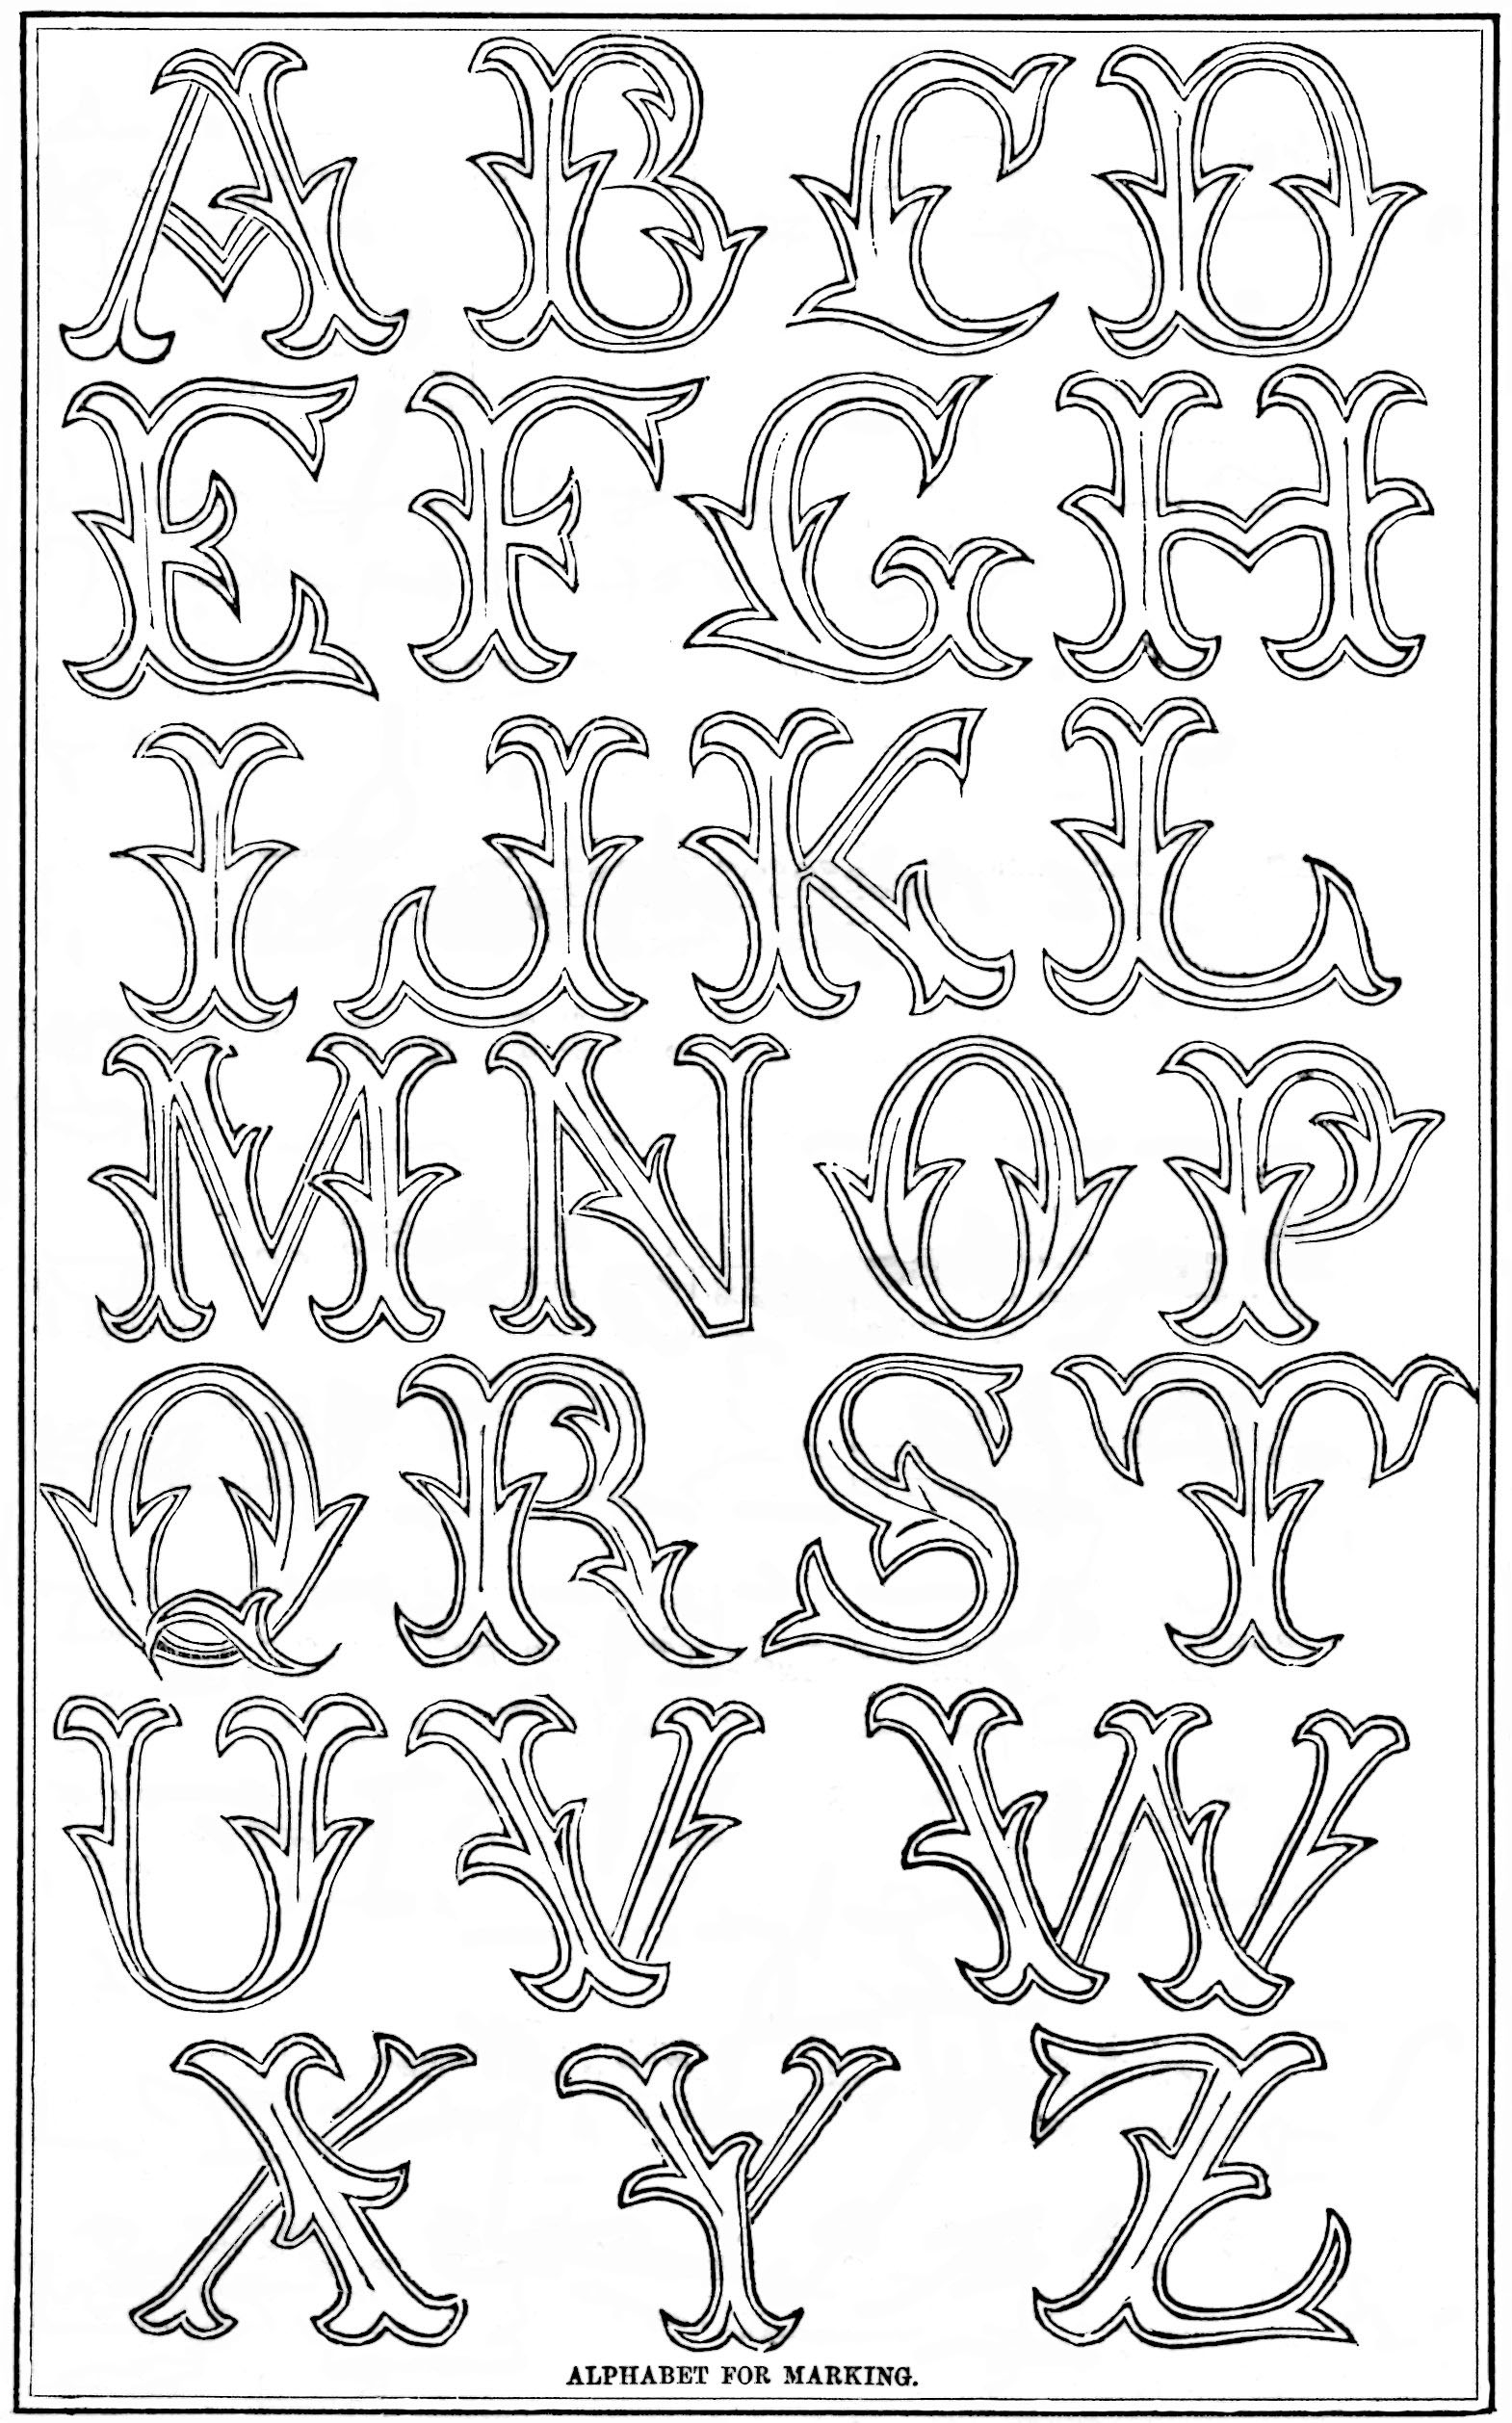 Hand Embroidery Monogram Patterns Fancy Antique Alphabet Patterns For Embroidery Monograms Vintage